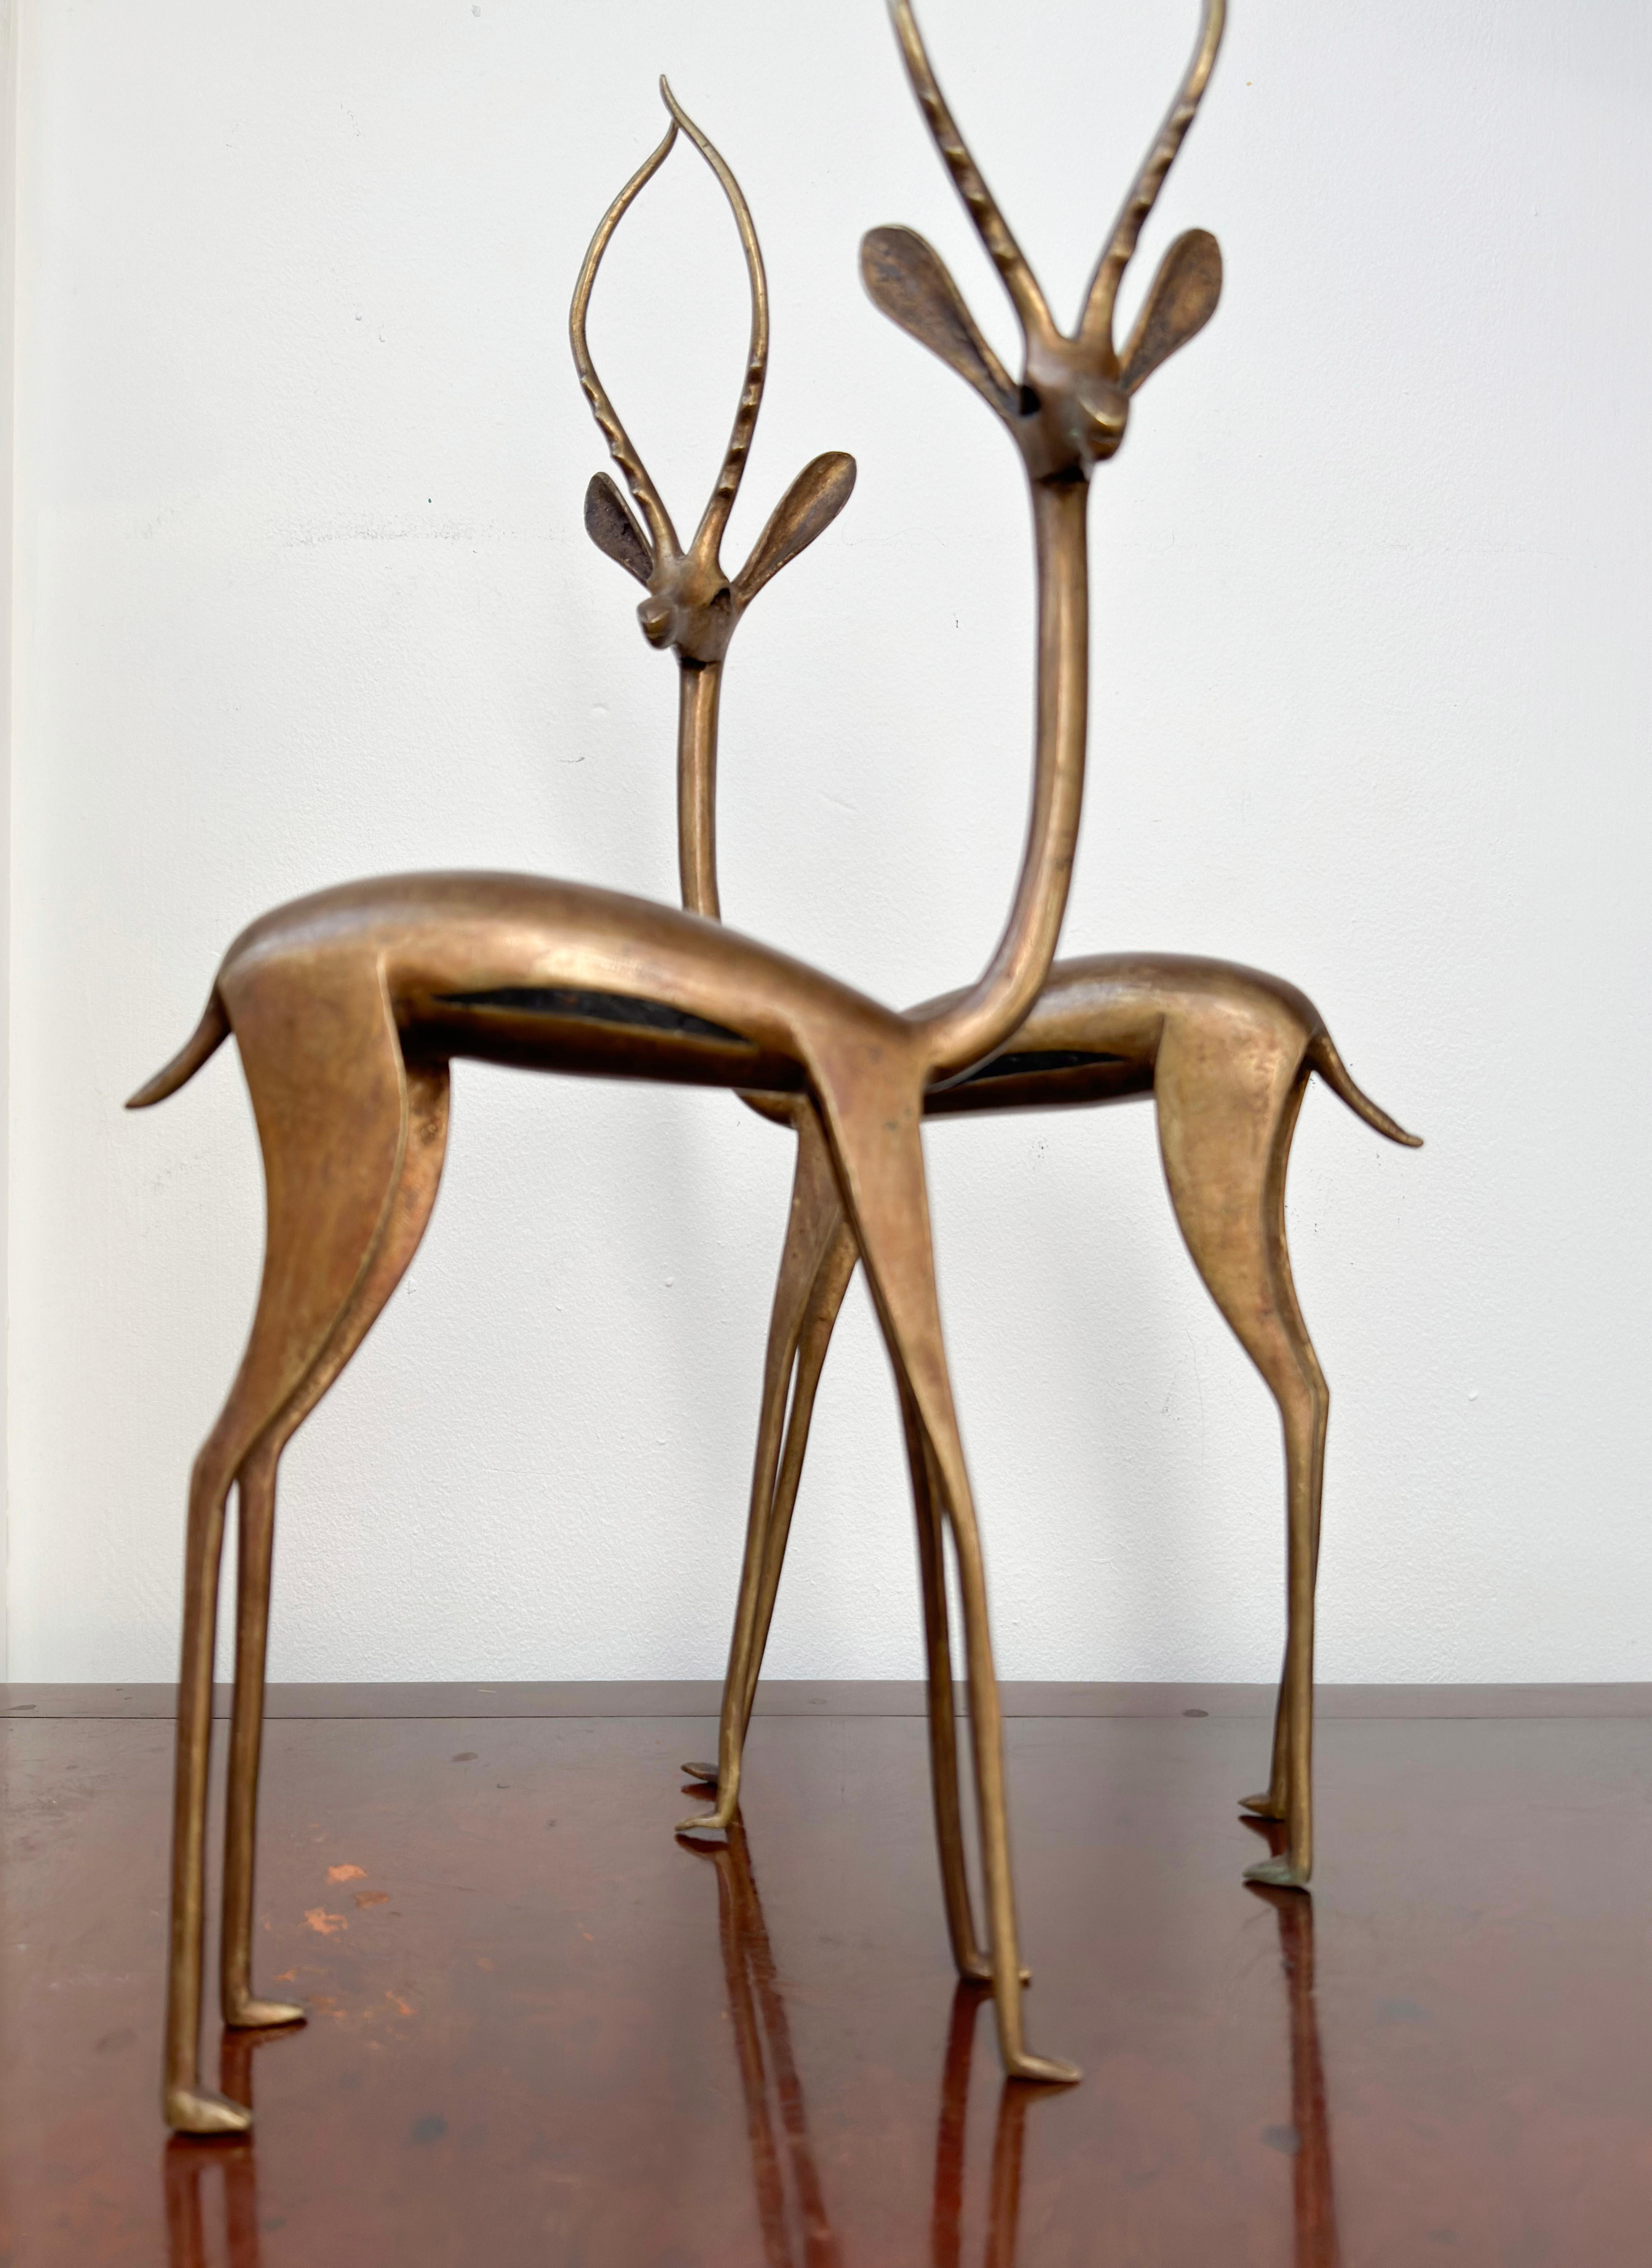 A pair of mid-century bronze gazelle sculptures. The ornamental sculptures were handcrafted in the 1960s by the renowned Tuareg Tribe in Africa. The sculptures offer a stylized interpretation of gazelles, characterized by their long, slender forms